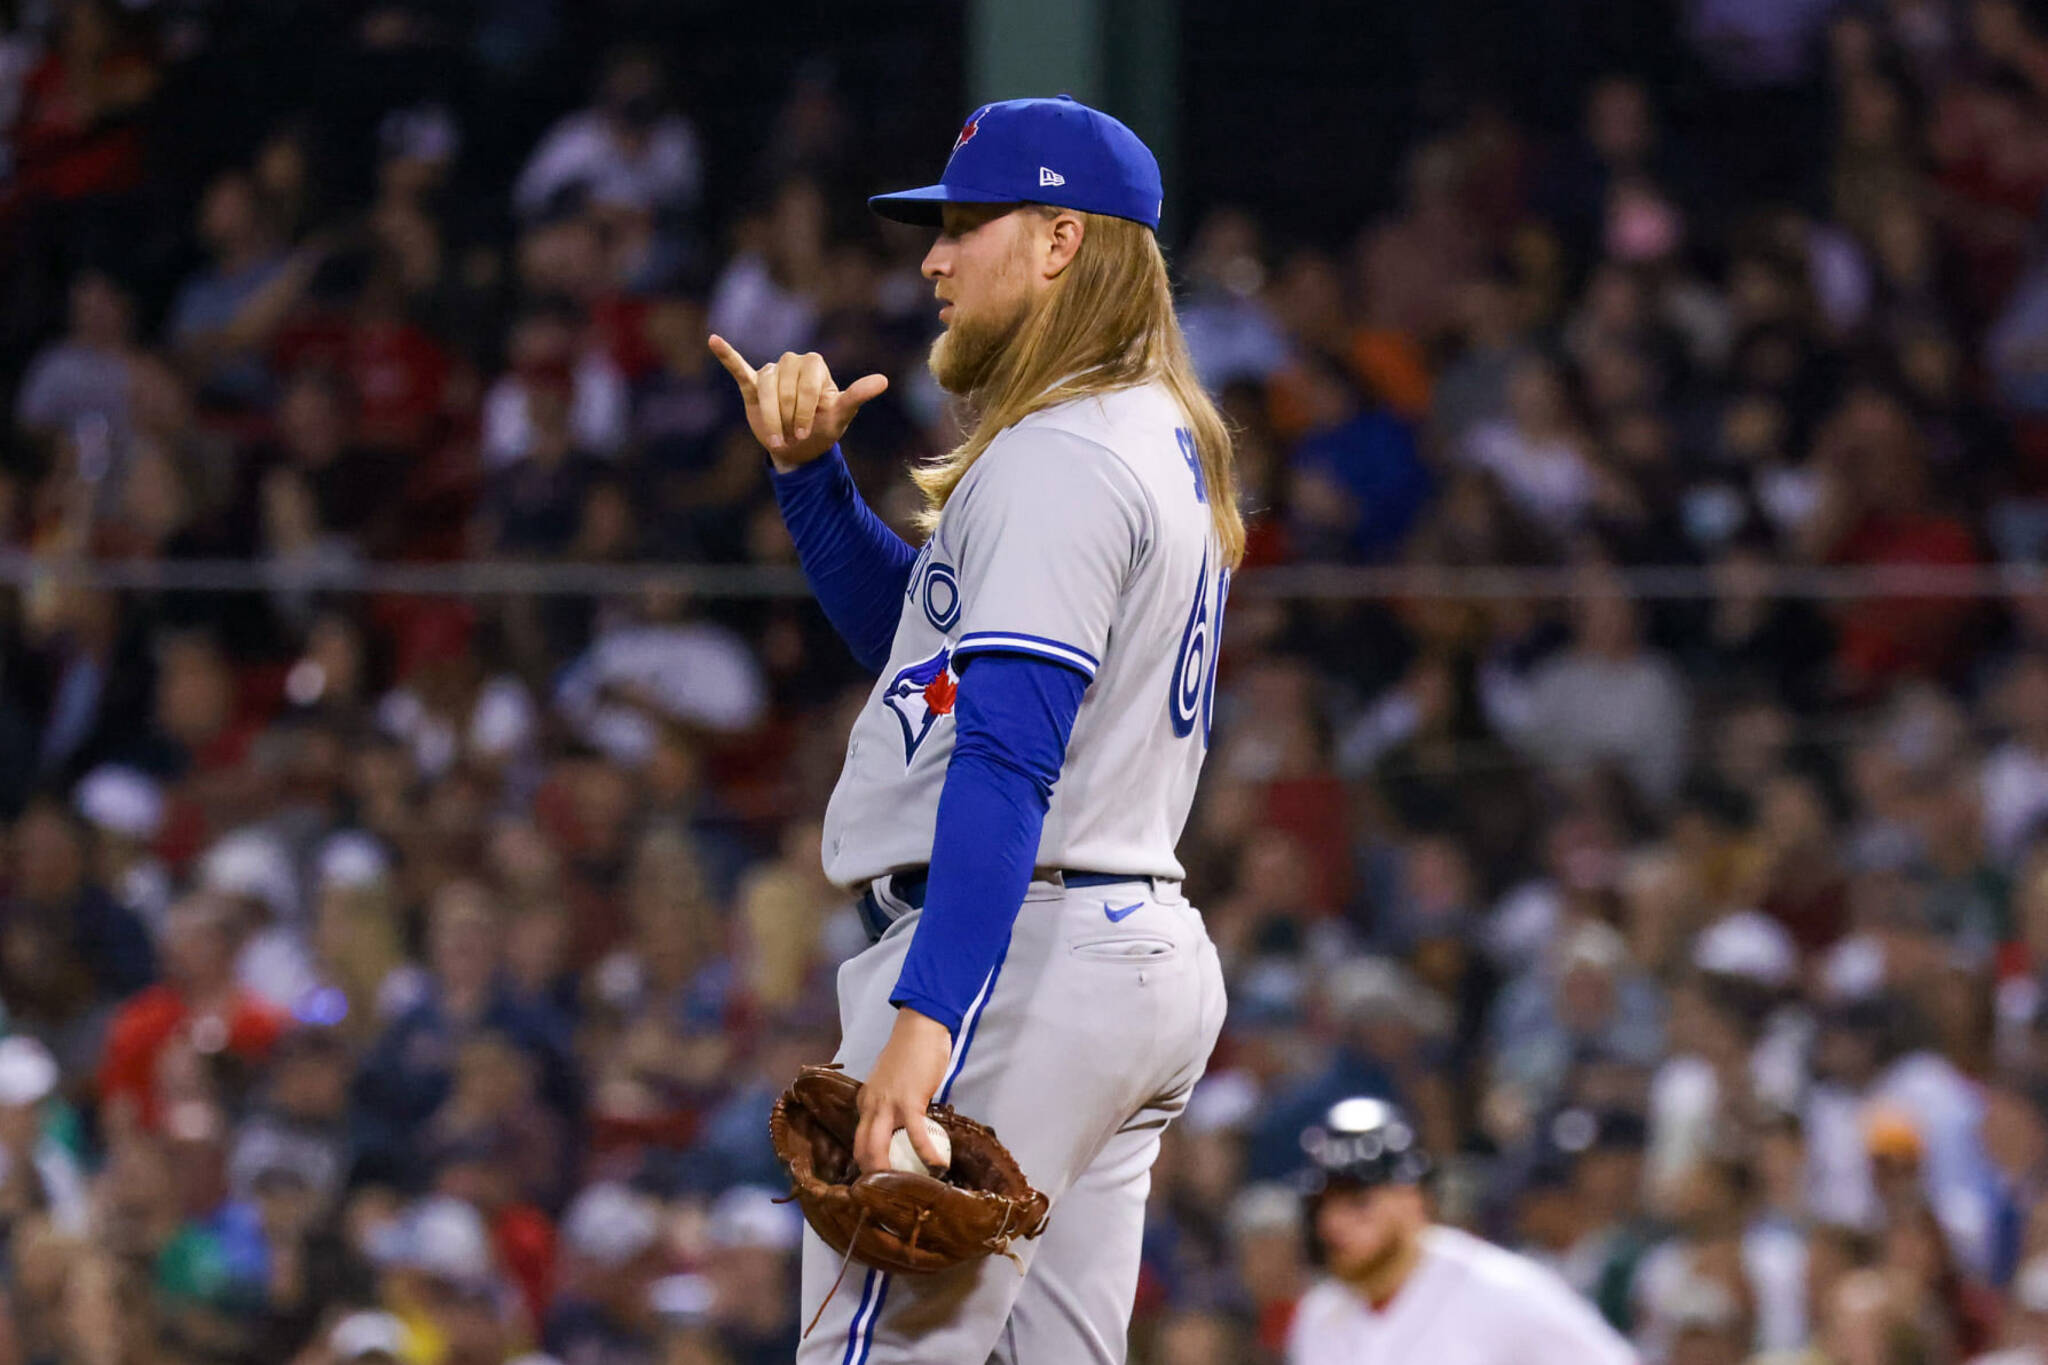 Toronto Blue Jays just got a player who might have the best hair